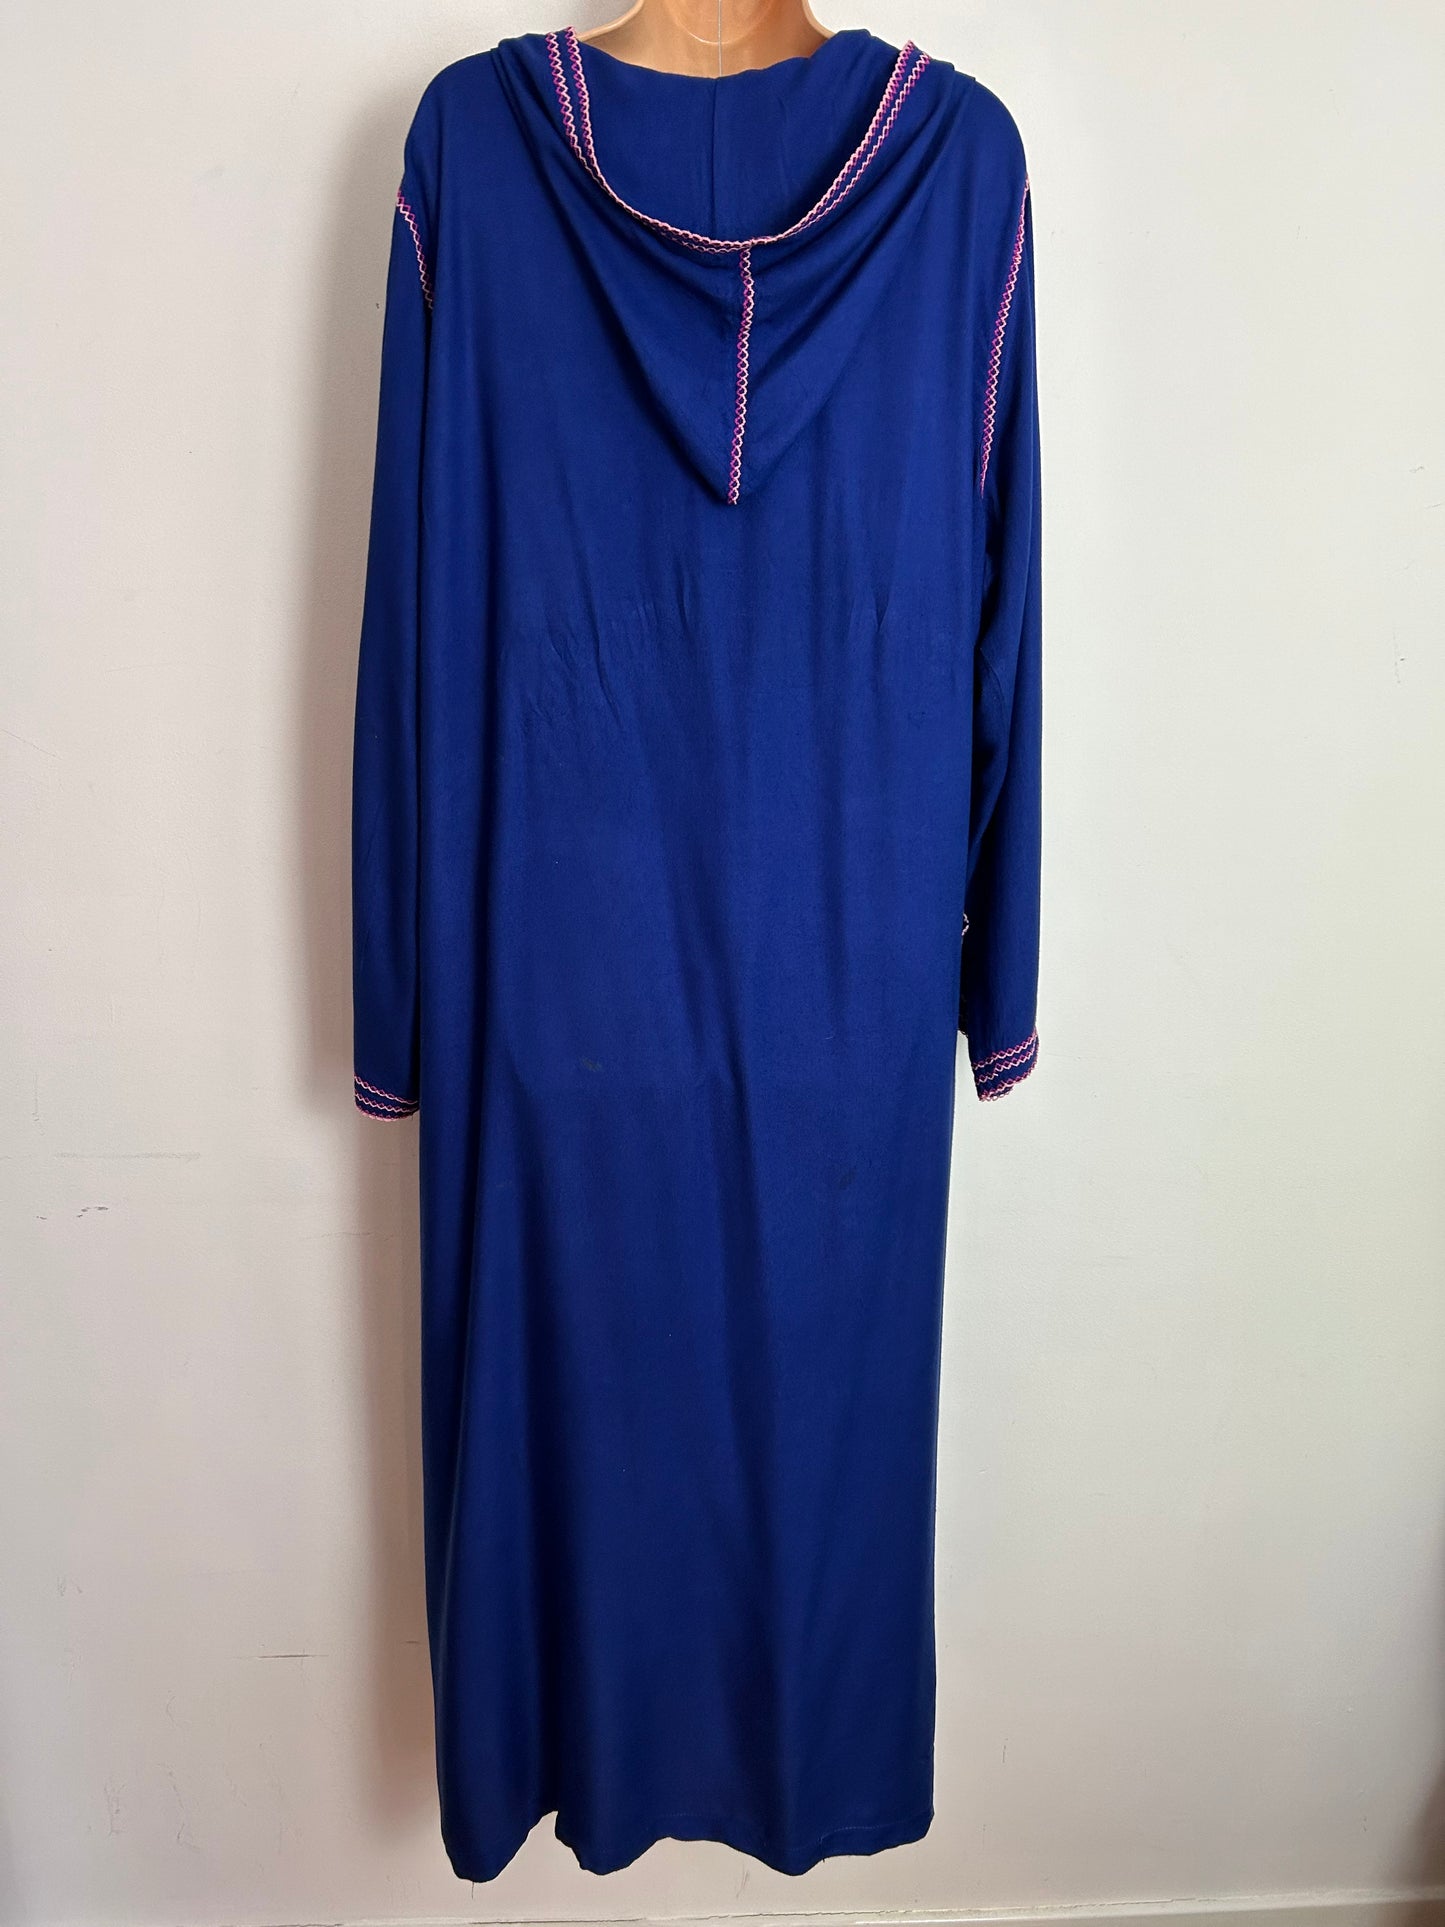 Vintage Free Size Up To Size 20-22 Navy Blue Pink Stich & Embroidered Detail Moroccan Hooded Abaya Kaftan